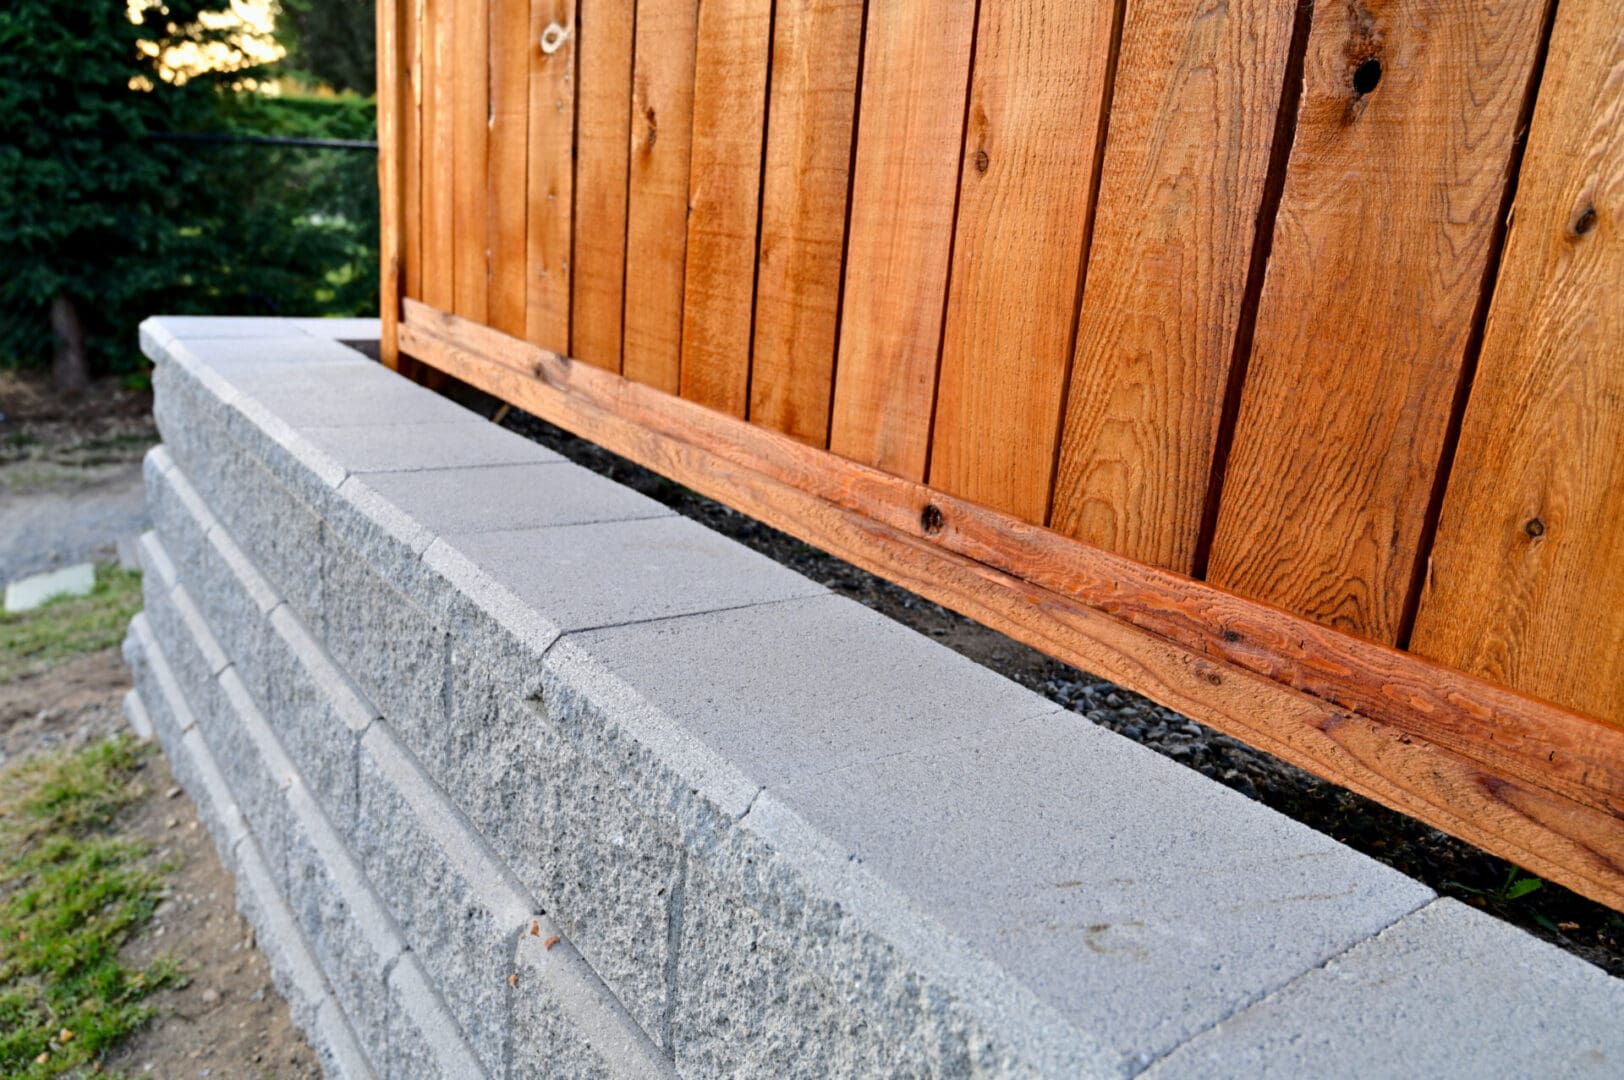 A wooden fence with concrete blocks and cement steps.